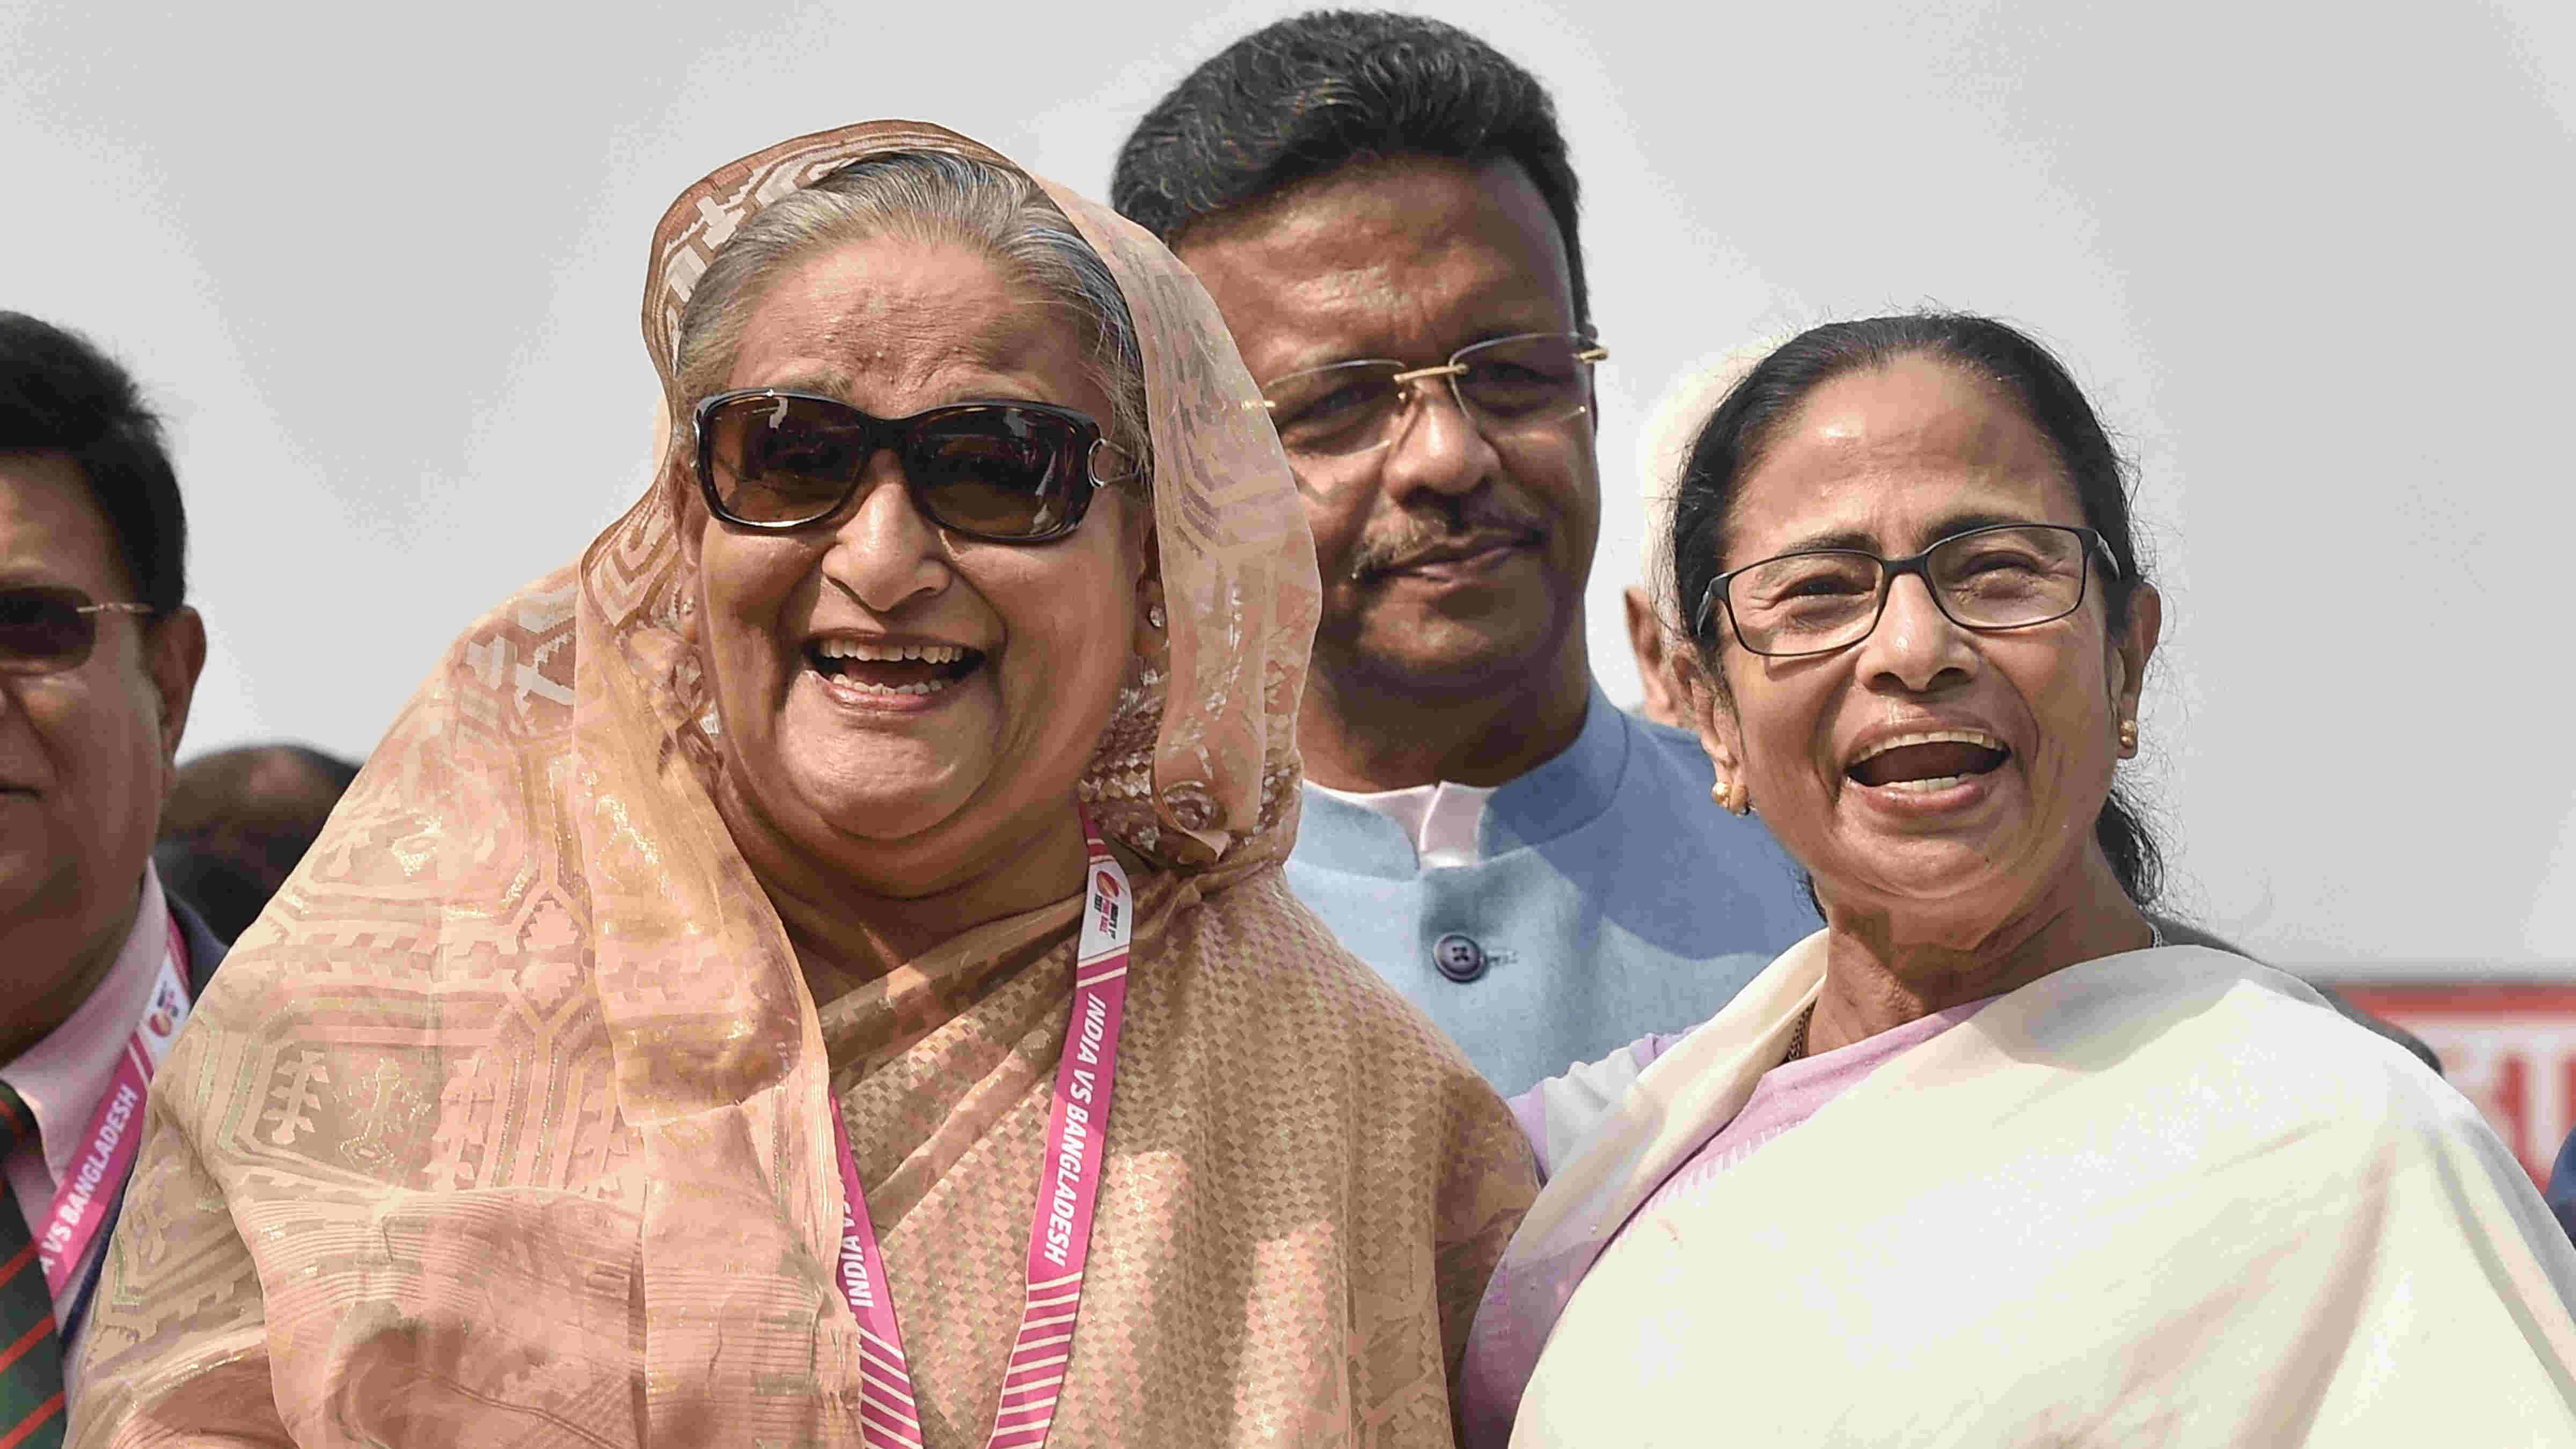 Bangladesh Prime Minister Sheikh Hasina and West Bengal Chief Minister Mamata Banerjee during the historic pink-ball day/night cricket test match between India and Bangladesh, at the Eden Gardens in Kolkata, on Friday, Nov. 22, 2019.